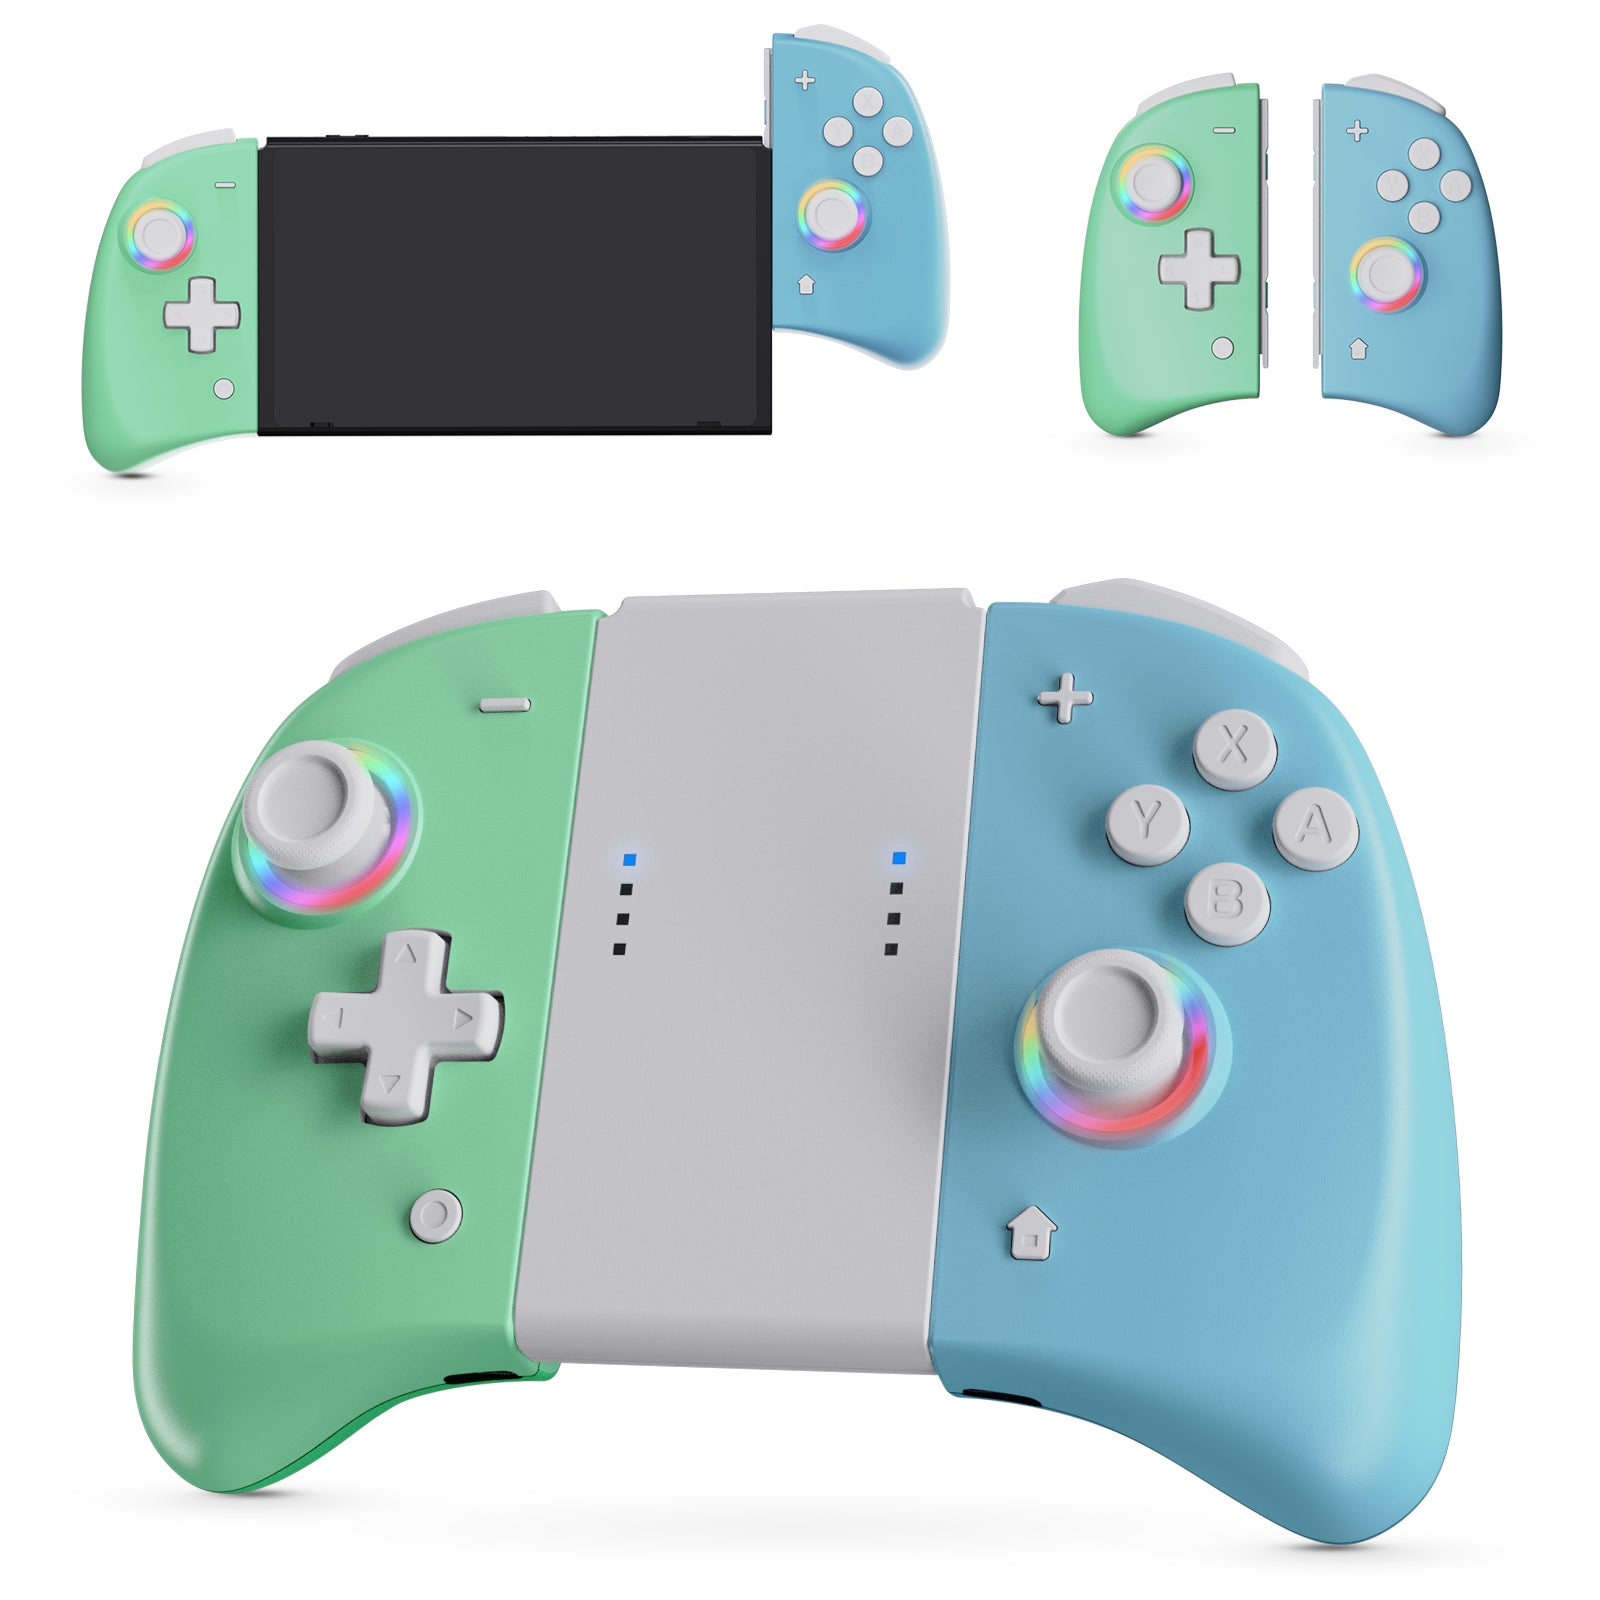 Joypad Controllers with Vibration, Turbo, Mapping and LED Light (Green & Blue)